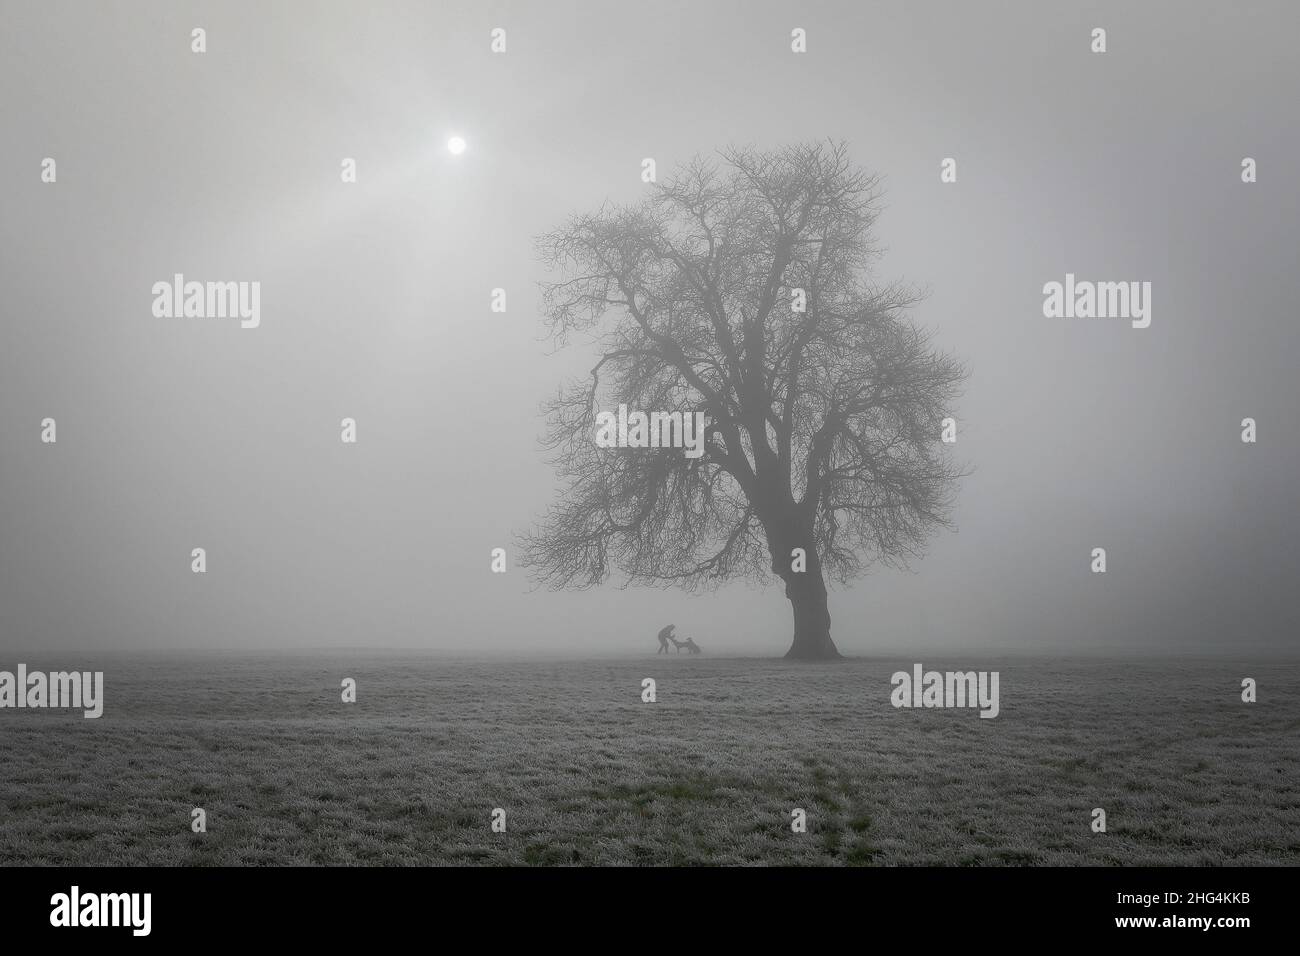 A lone tree in the foggy weather on Braunstone Park in Leicester, the dog walker underneath the tree gives the image scale. Stock Photo